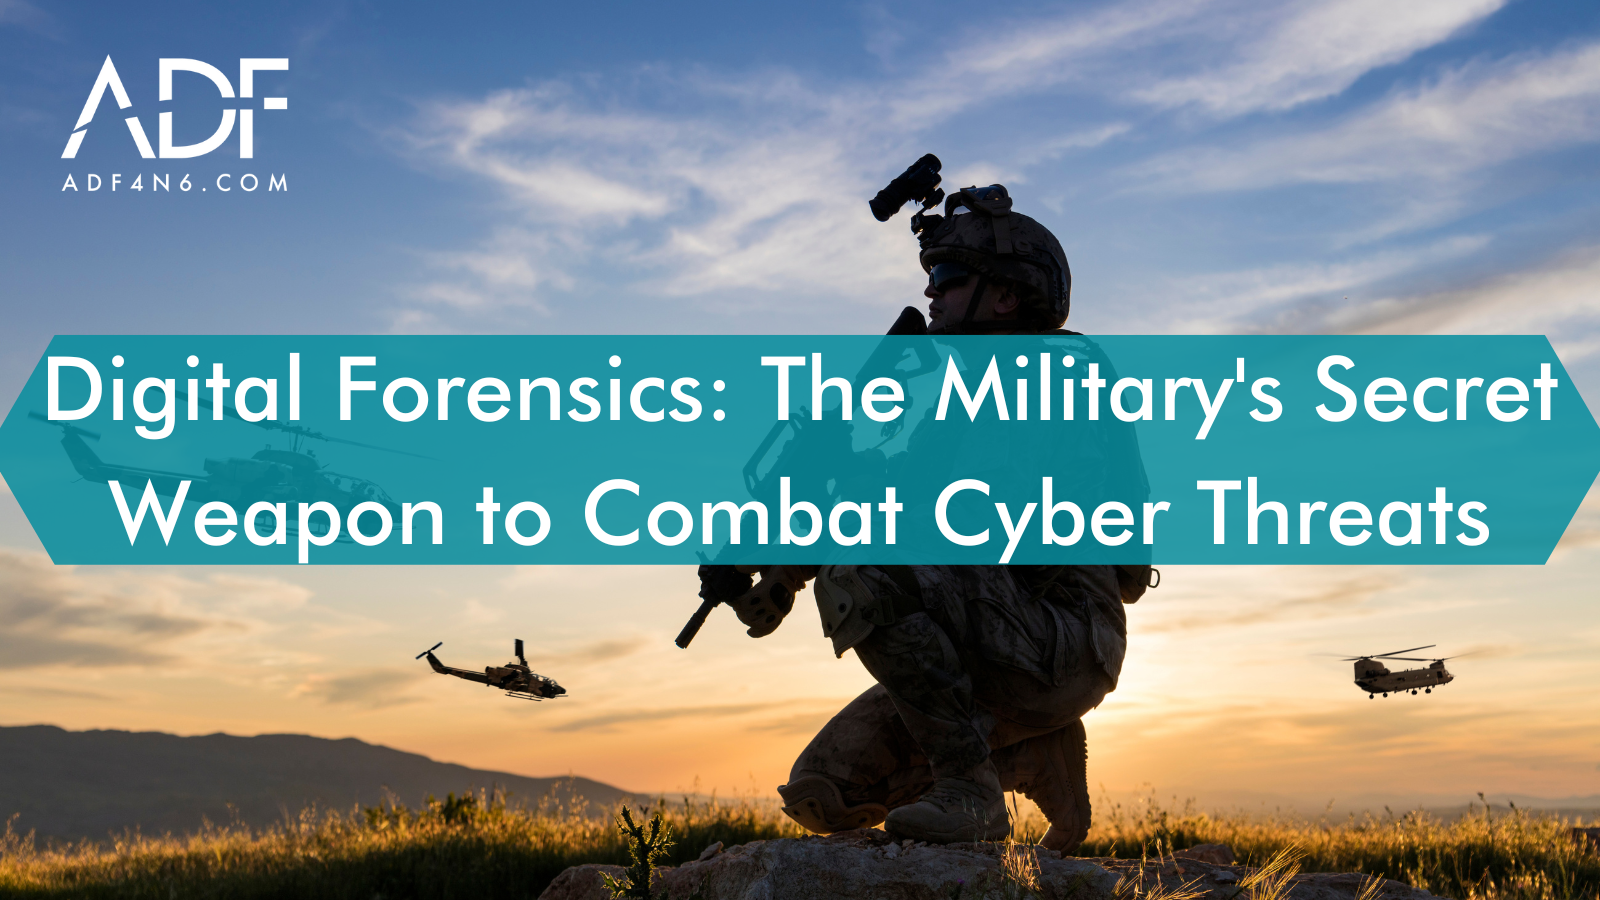 Digital Forensics: The Military's Secret to Combating Cyber Threats